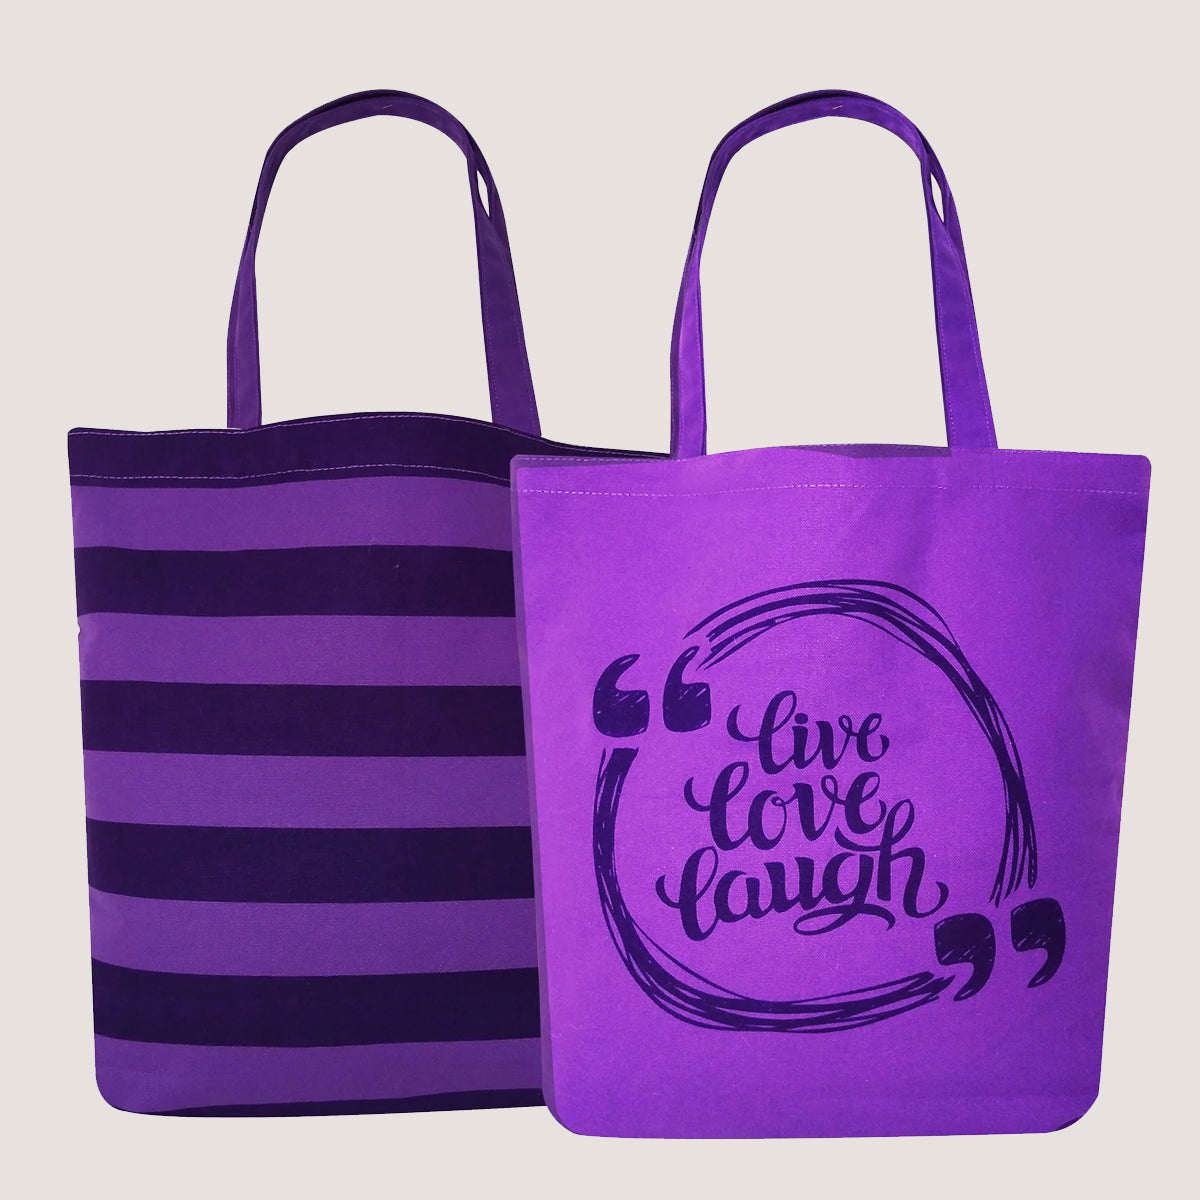 EARTHBAGS CANVAS TOTE BAG IN VIOLET - PACK OF 2